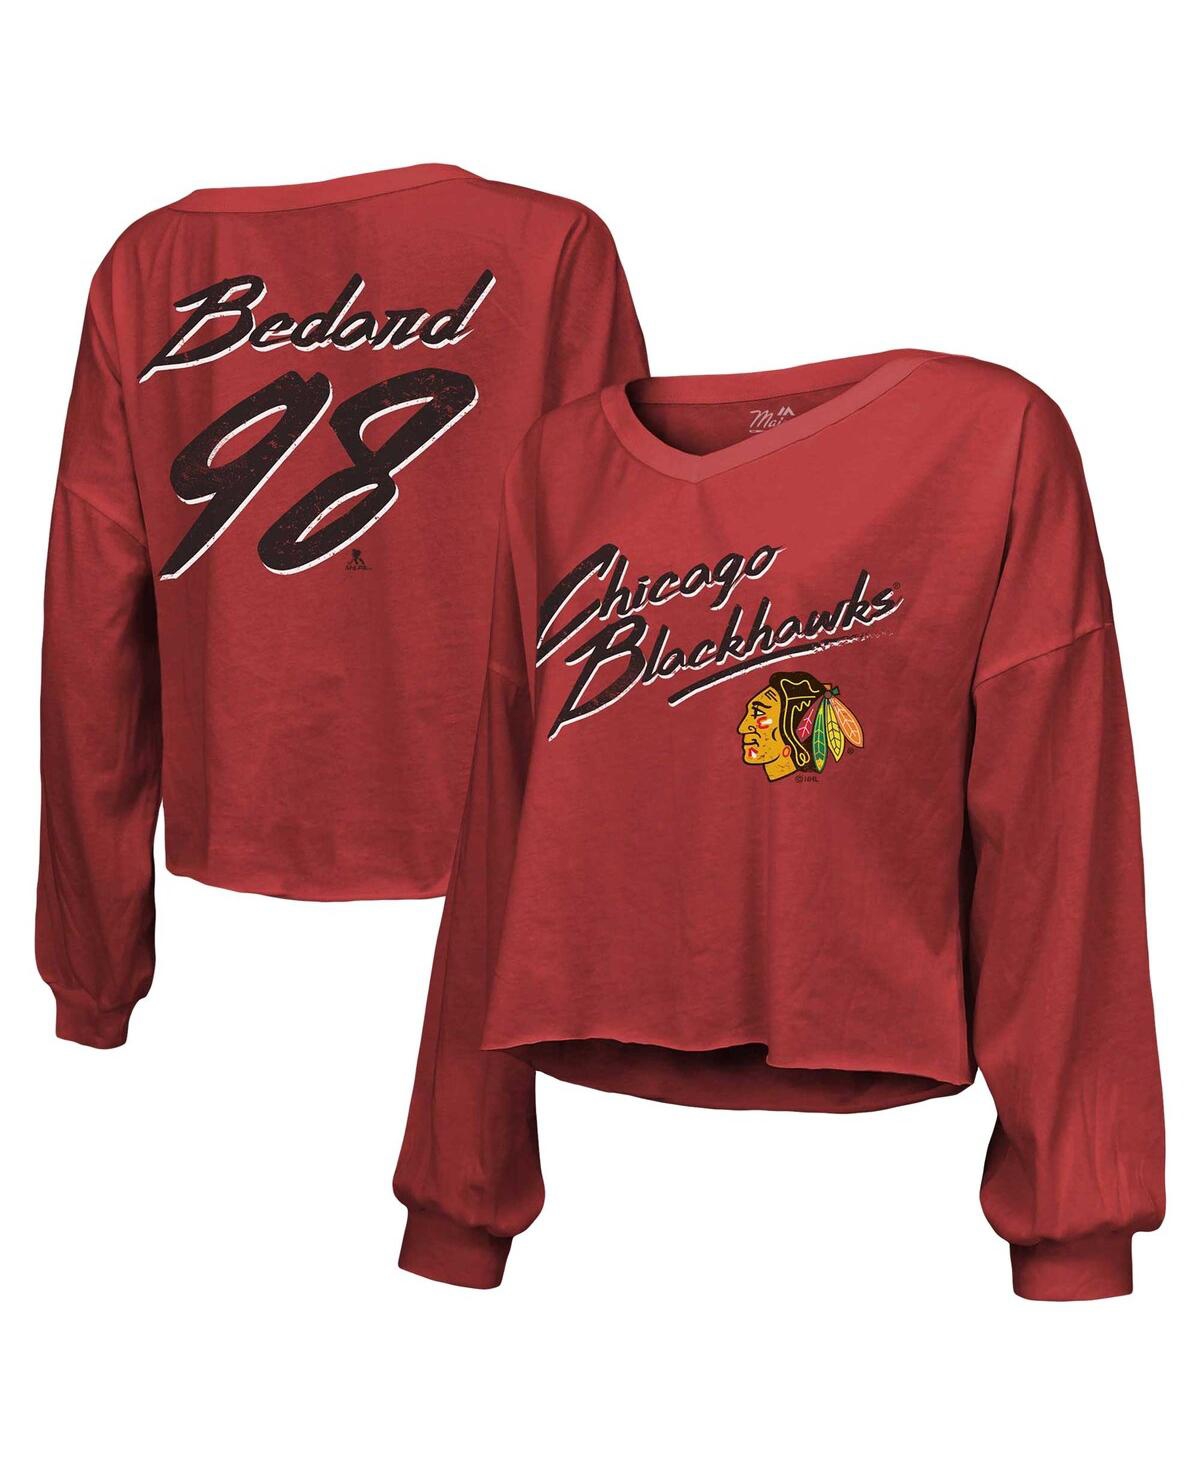 Majestic Women's  Threads Connor Bedard Red Distressed Chicago Blackhawks Off-shoulder Name And Numbe